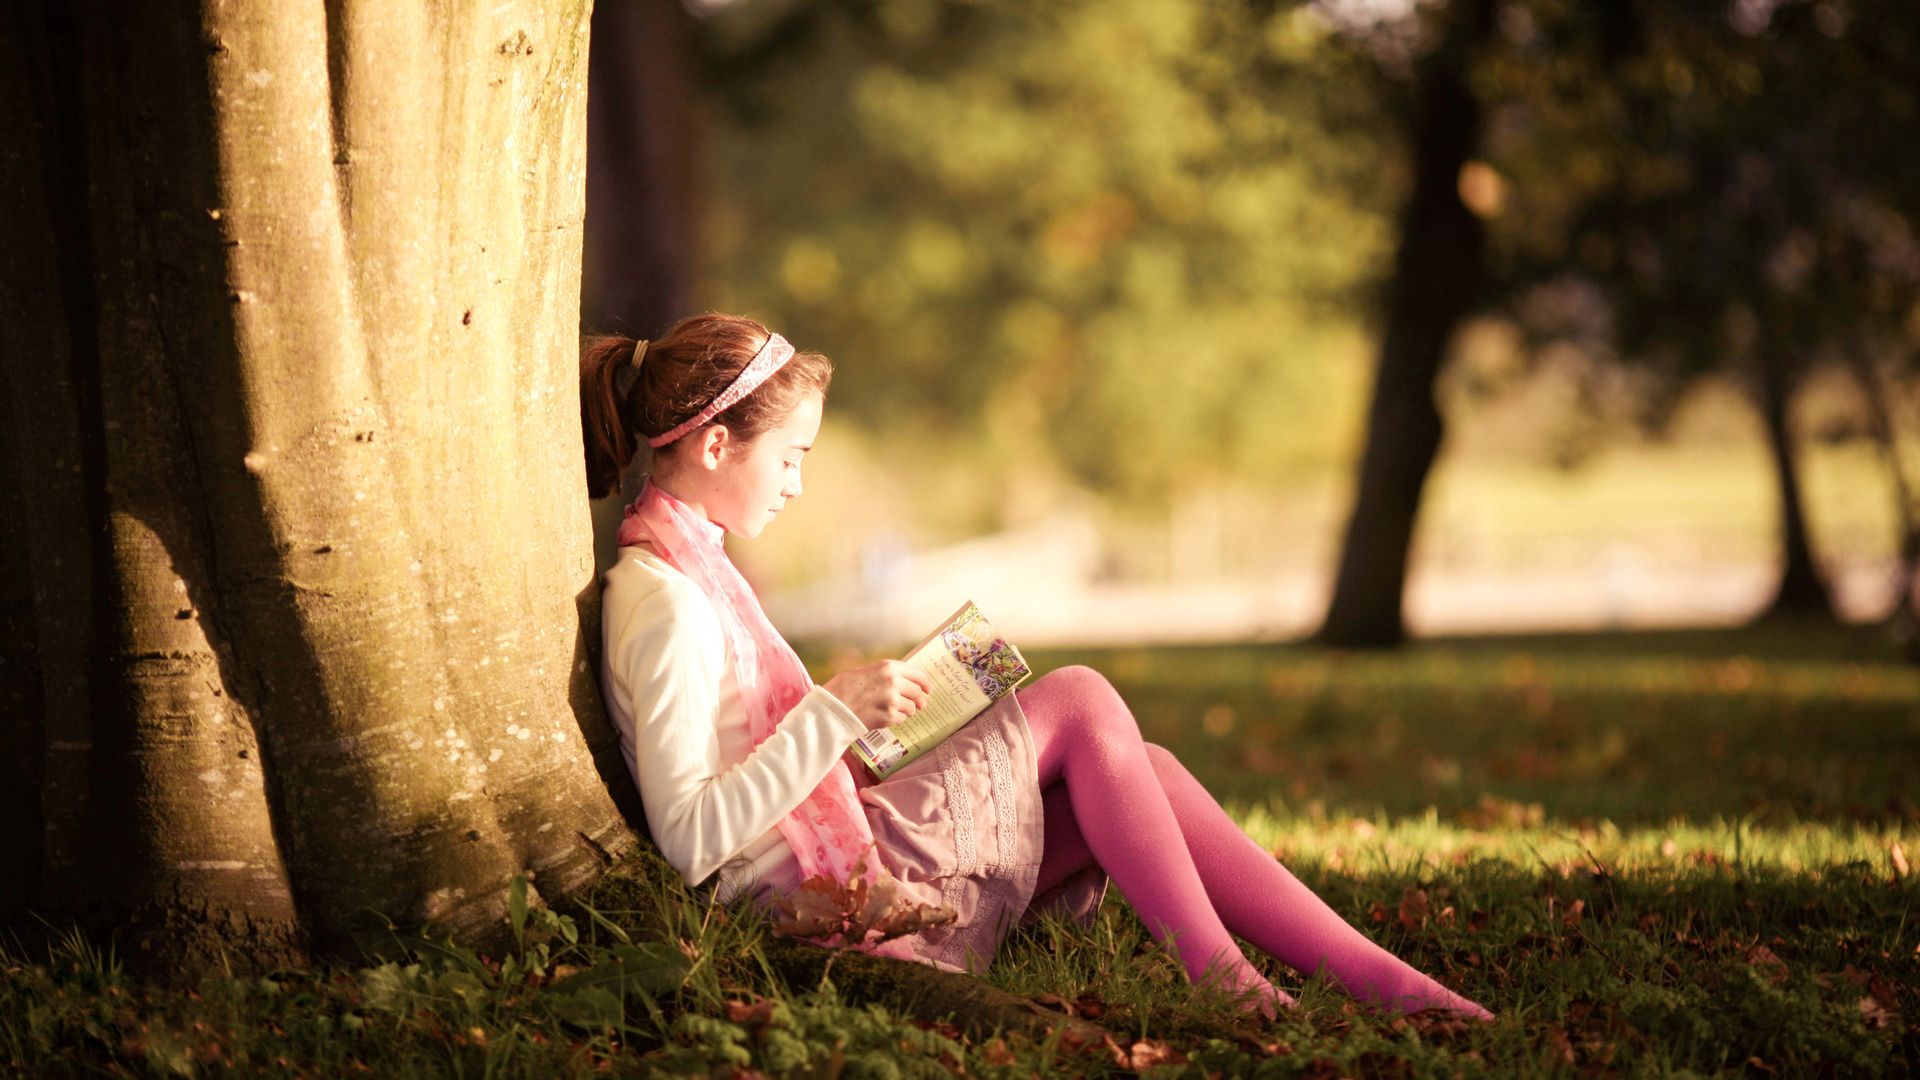 1920x1080 trees, nature, girl, park, book, privacy Wallpapers and ...